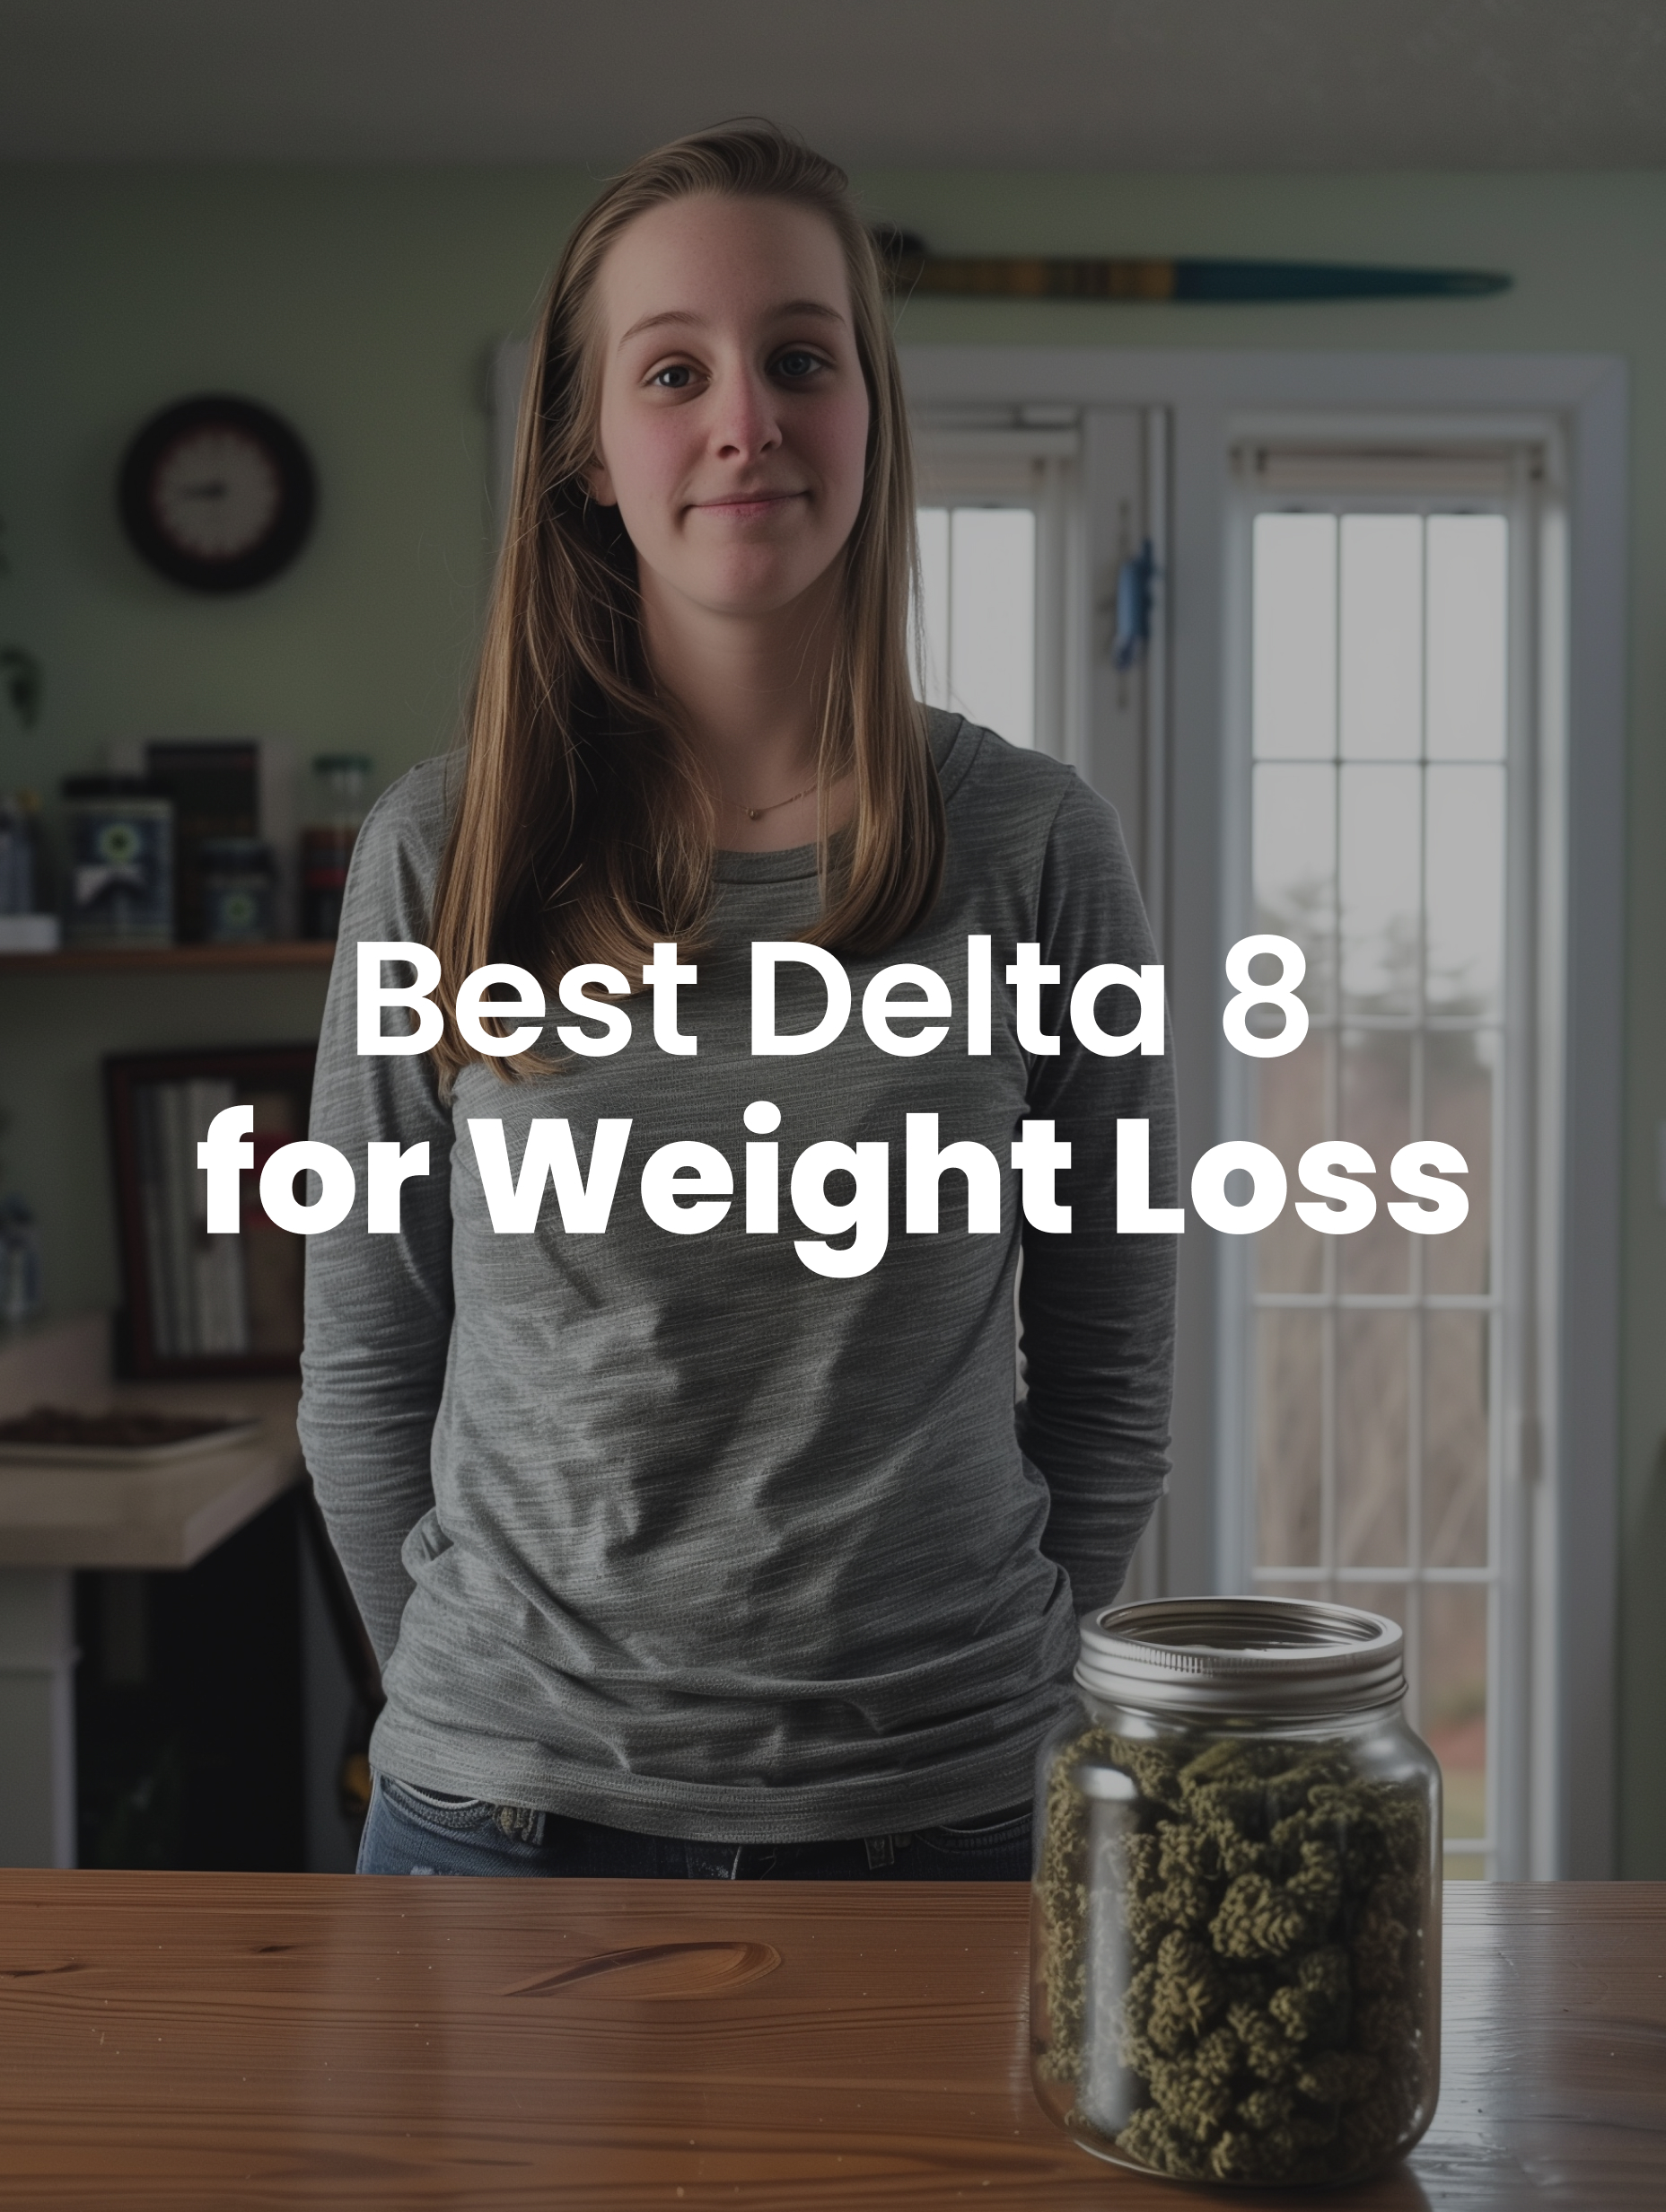 Best Delta 8 for Weight Loss